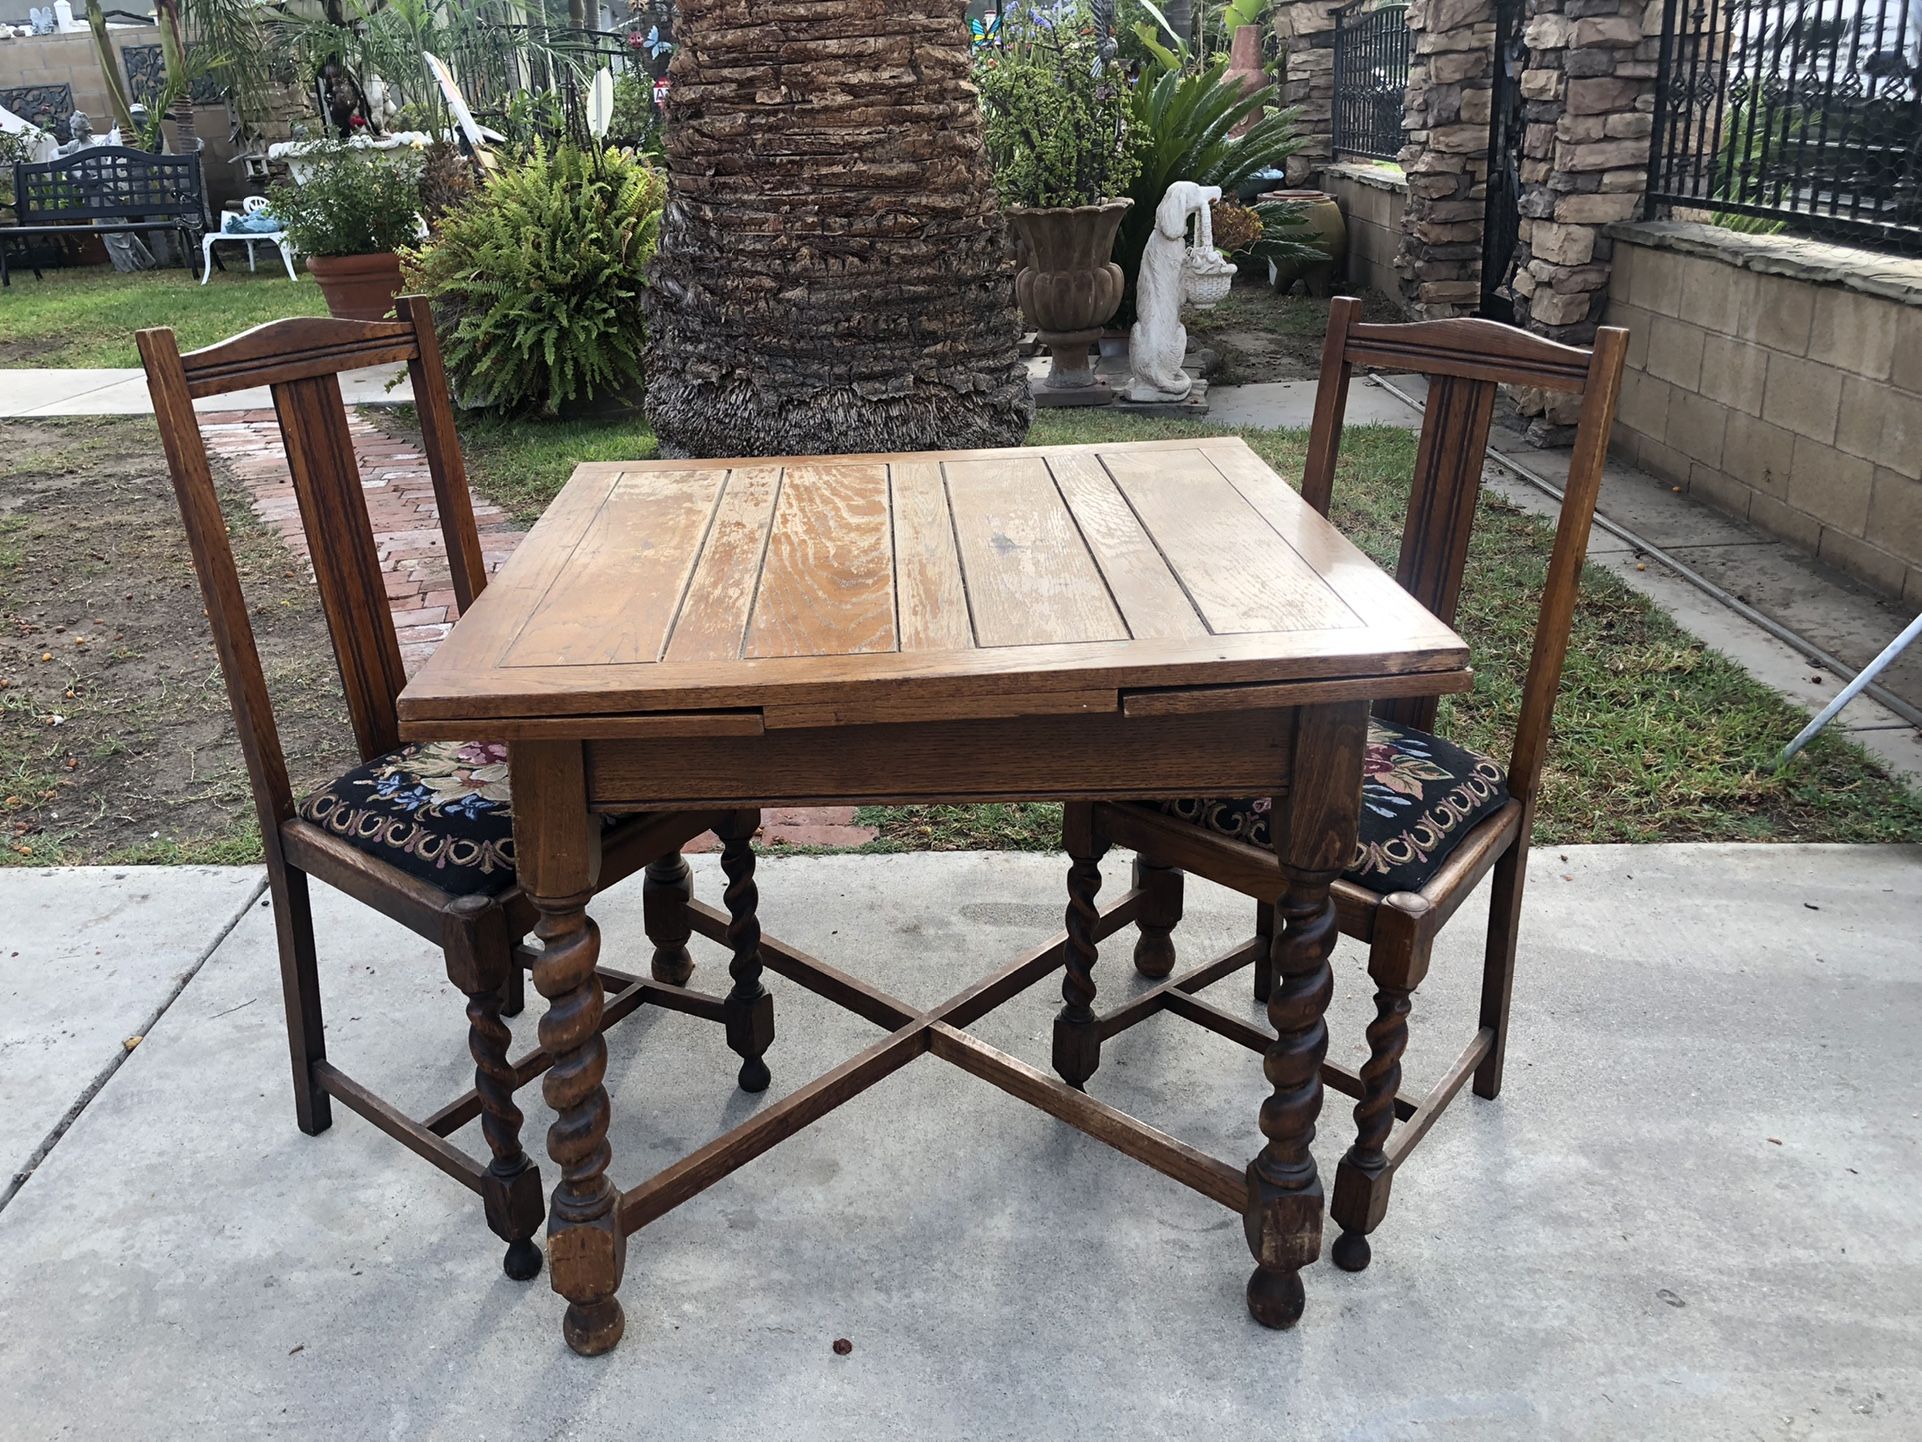 Vintage wooden Table Chair Set